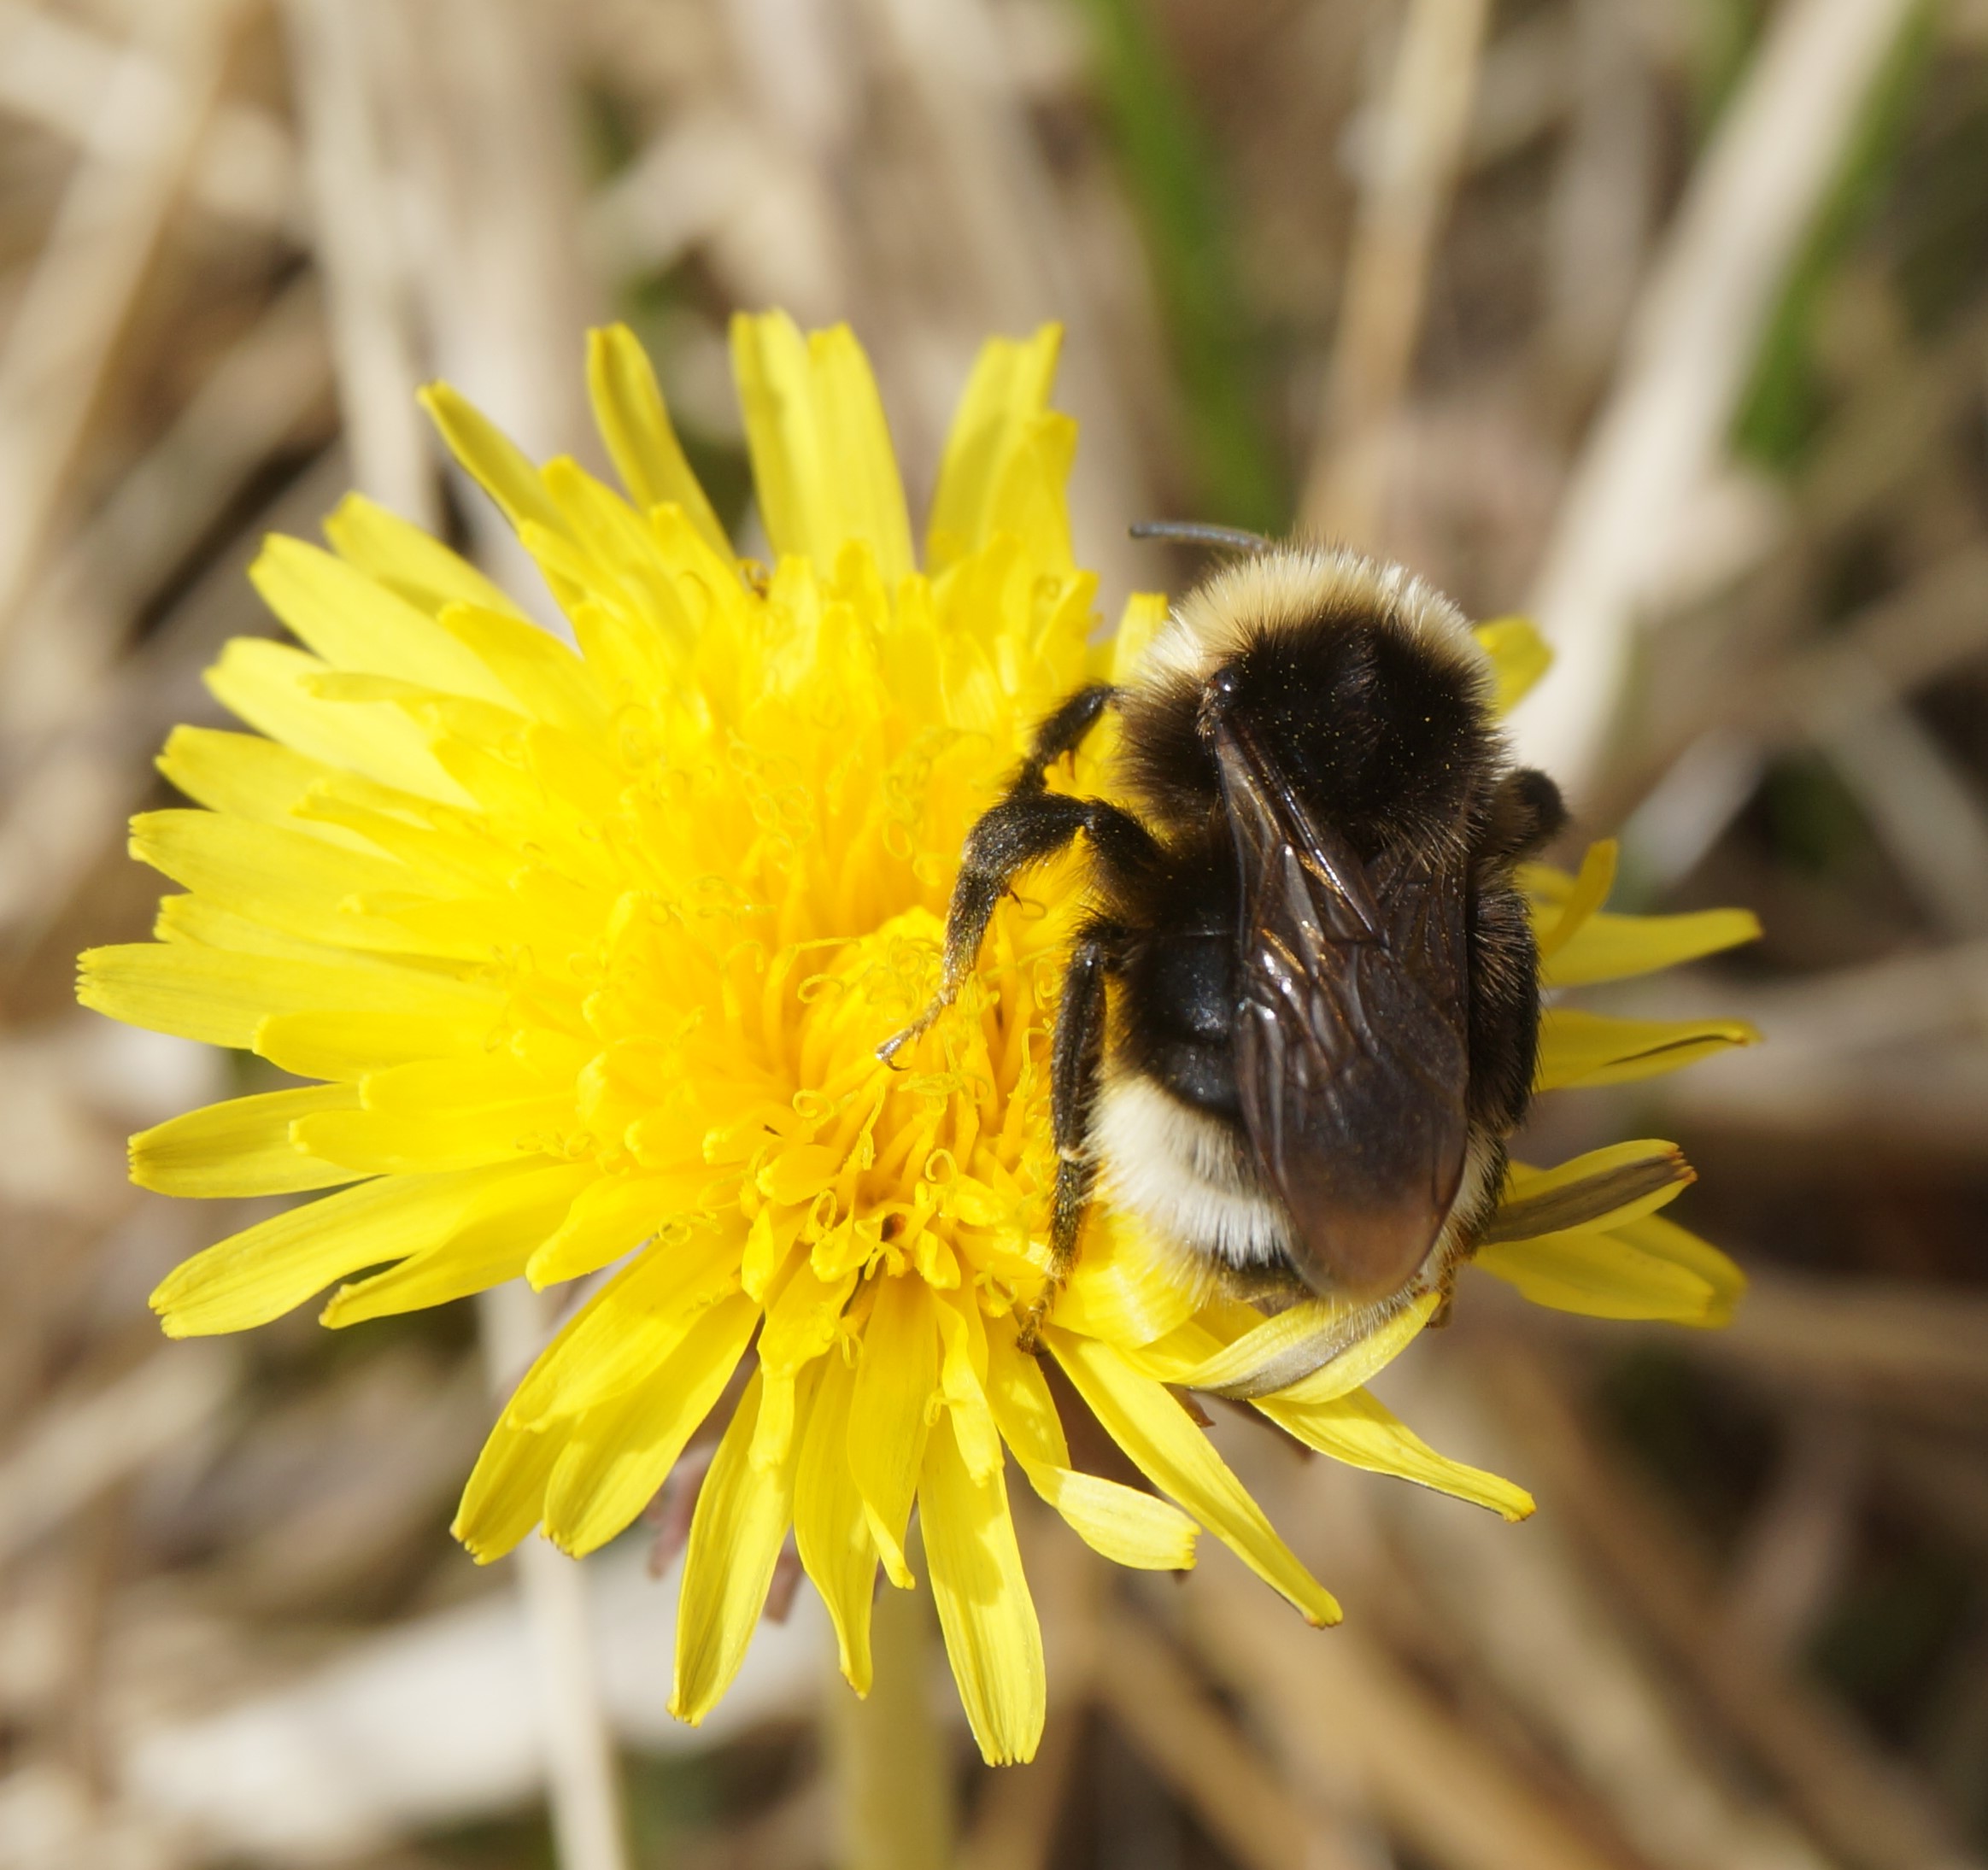 Close up of a bumble bee on a dandelion